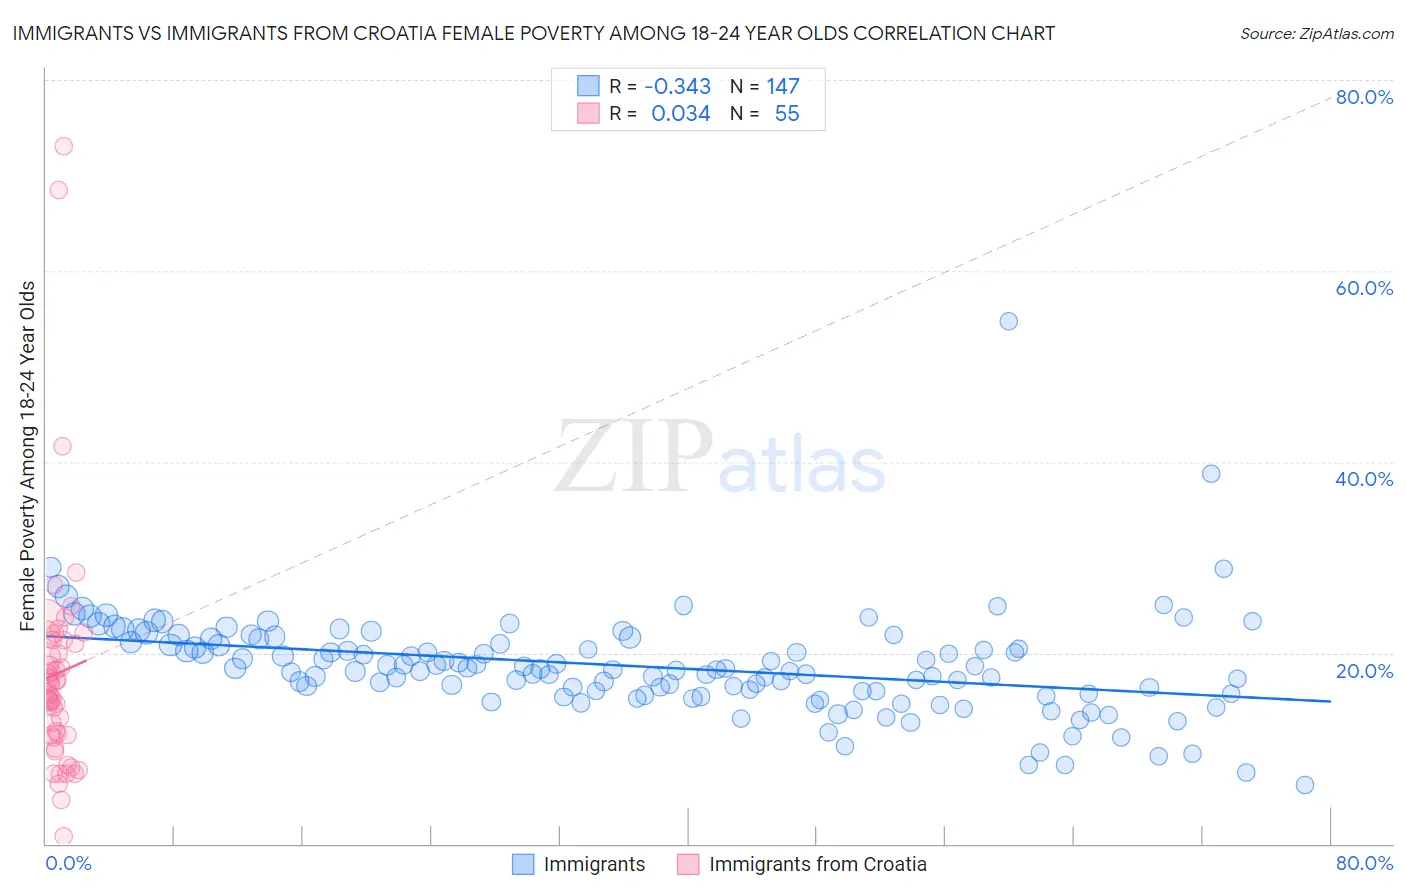 Immigrants vs Immigrants from Croatia Female Poverty Among 18-24 Year Olds